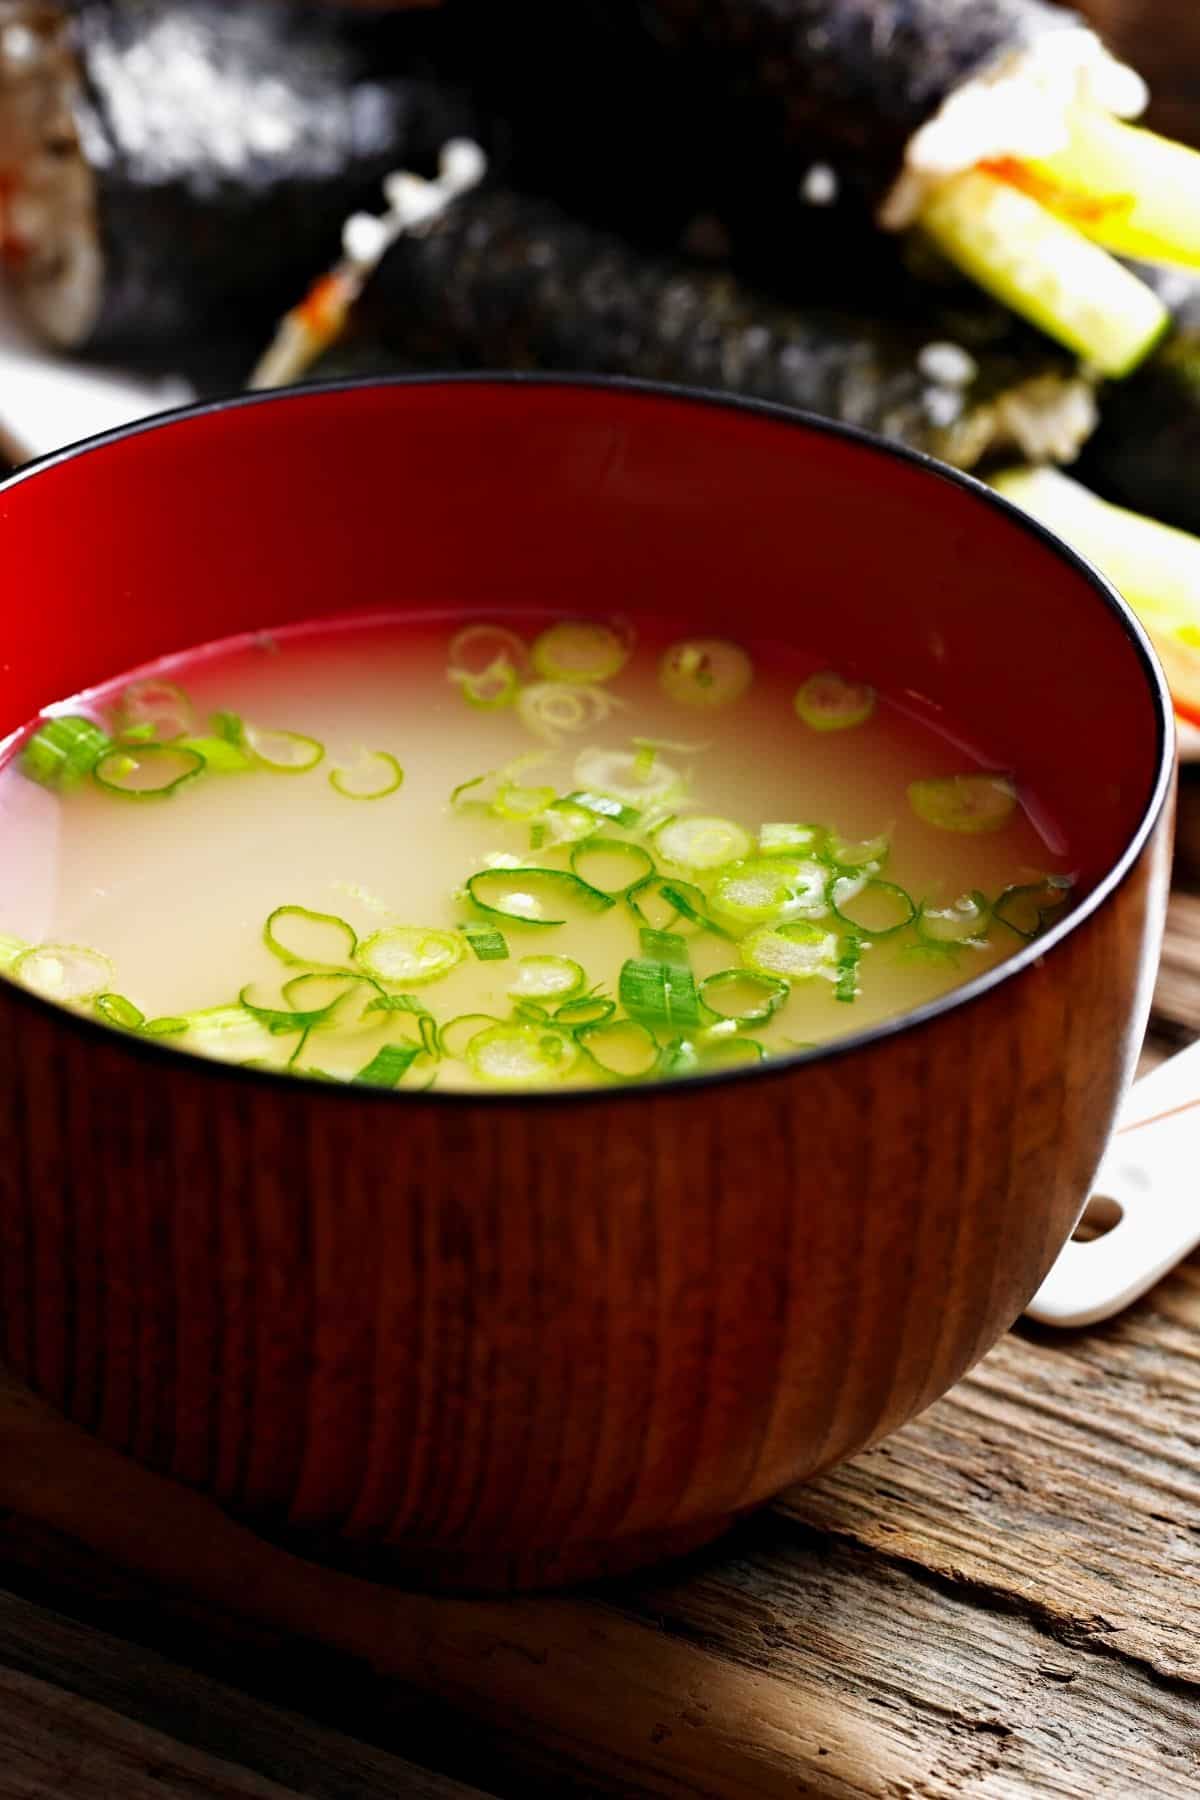 A bowl of miso soup in a restaurant.